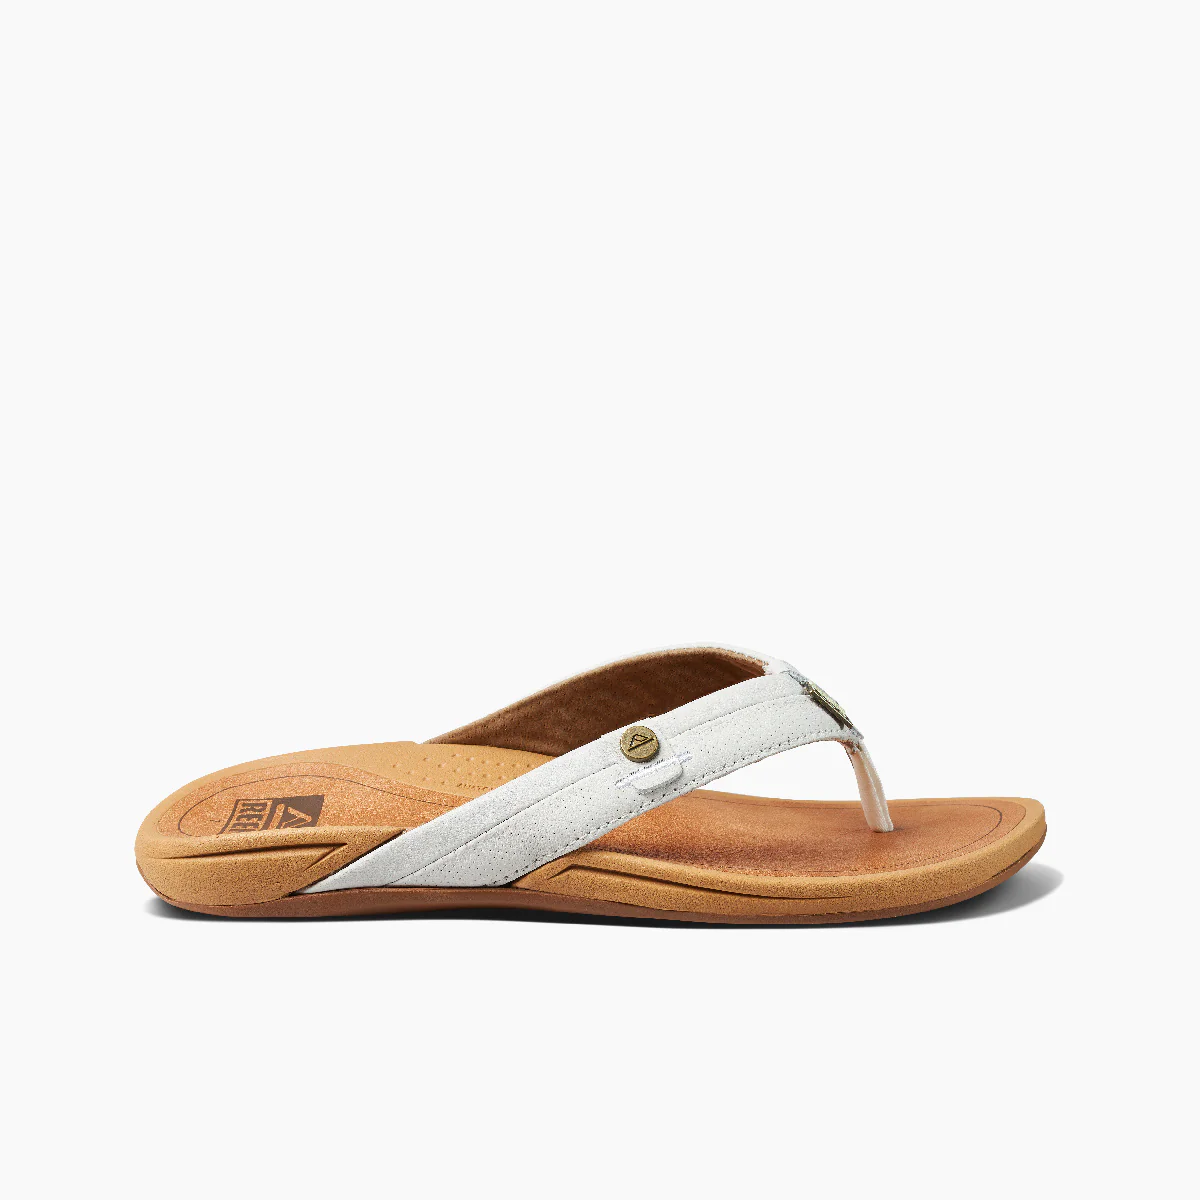 Women's Reef Pacific Sandals in Cloud side view